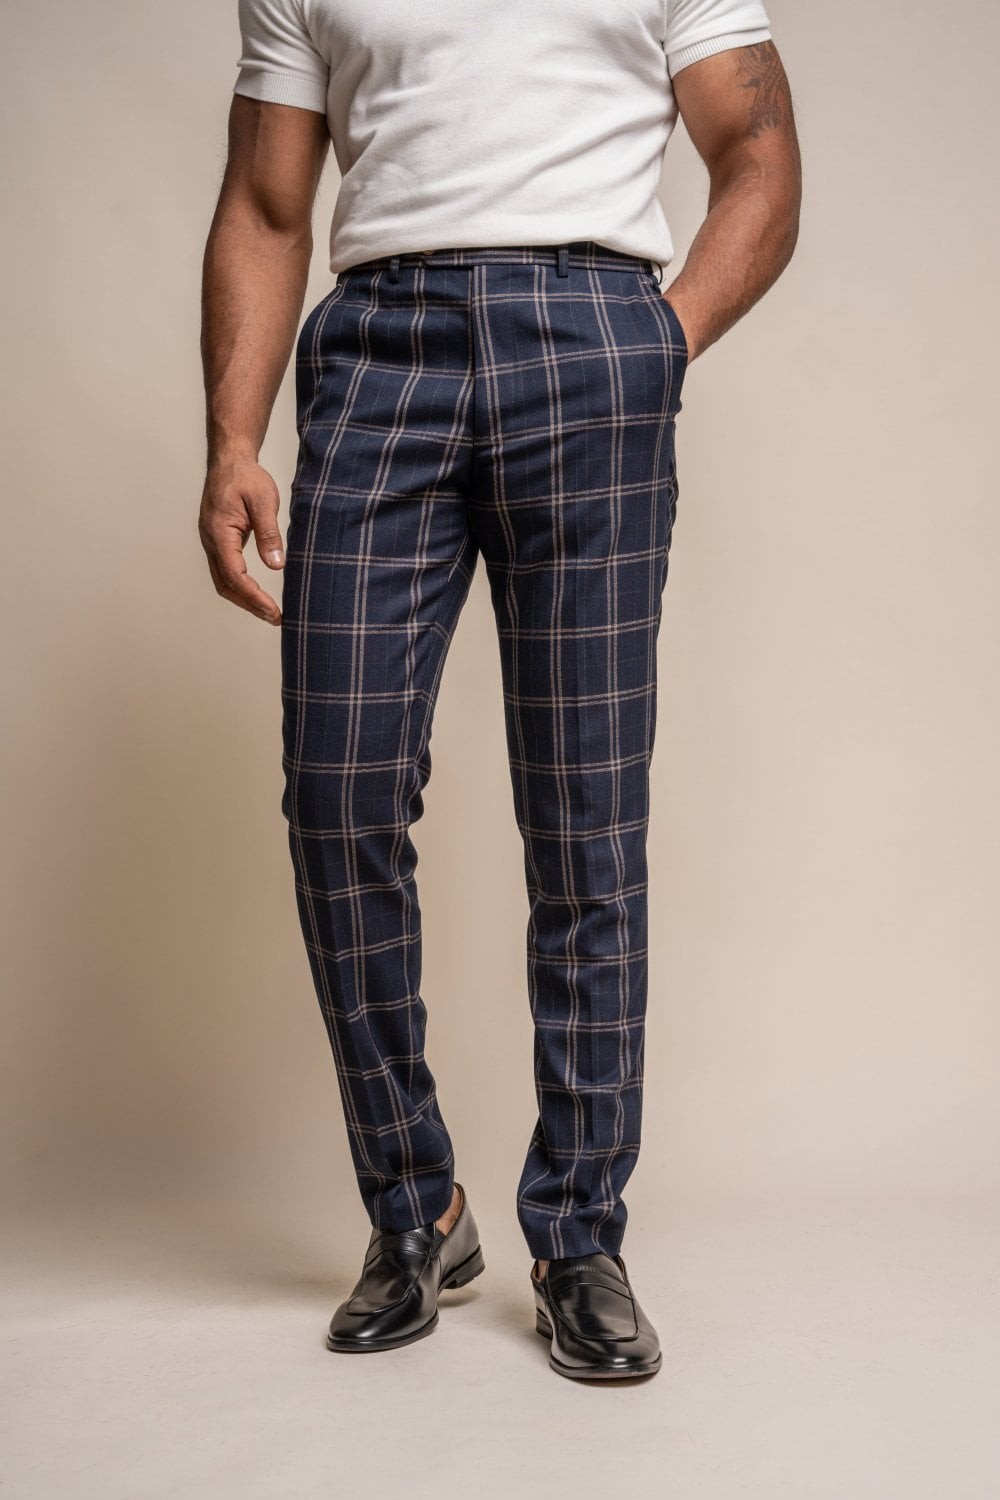 MARC DARCY Jerry Blue Check Trousers - Formal Wear from Revolver Menswear UK